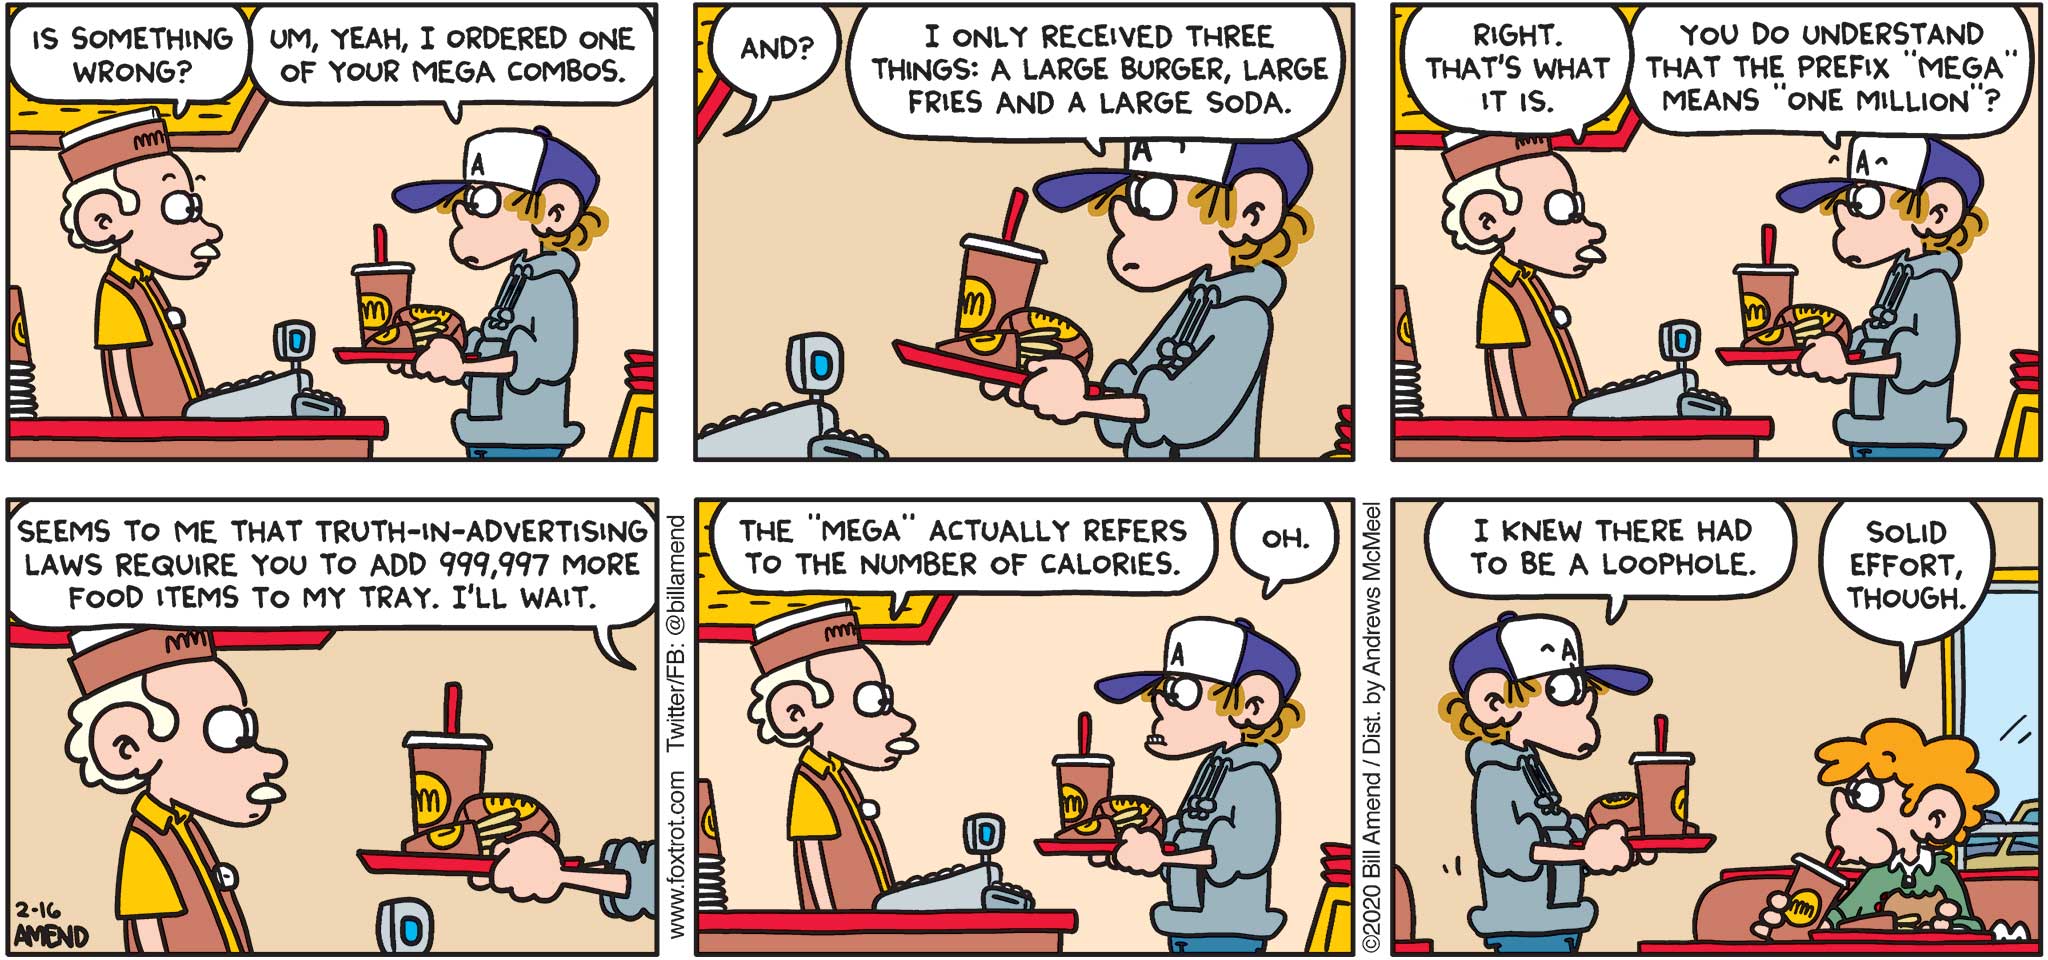 FoxTrot by Bill Amend - "Mega Combo" published February 16, 2020 - Cashier: Is something wrong? Peter: Um, yeah, I ordered one of your mega combos. Cashier: And? Peter: I only received three things: A large burger, large fries and a large soda. Cashier: Right. That's what it is. Peter: You do understand that the prefix "mega" means "one million"? Seems to me that truth-in-advertising laws require you to add 999,997 more food items to my tray. I'll wait. Cashier: The "mega" actually refers to the number of calories. Peter: Oh. I knew there had to be a loophole. Steve: Solid effort, though.